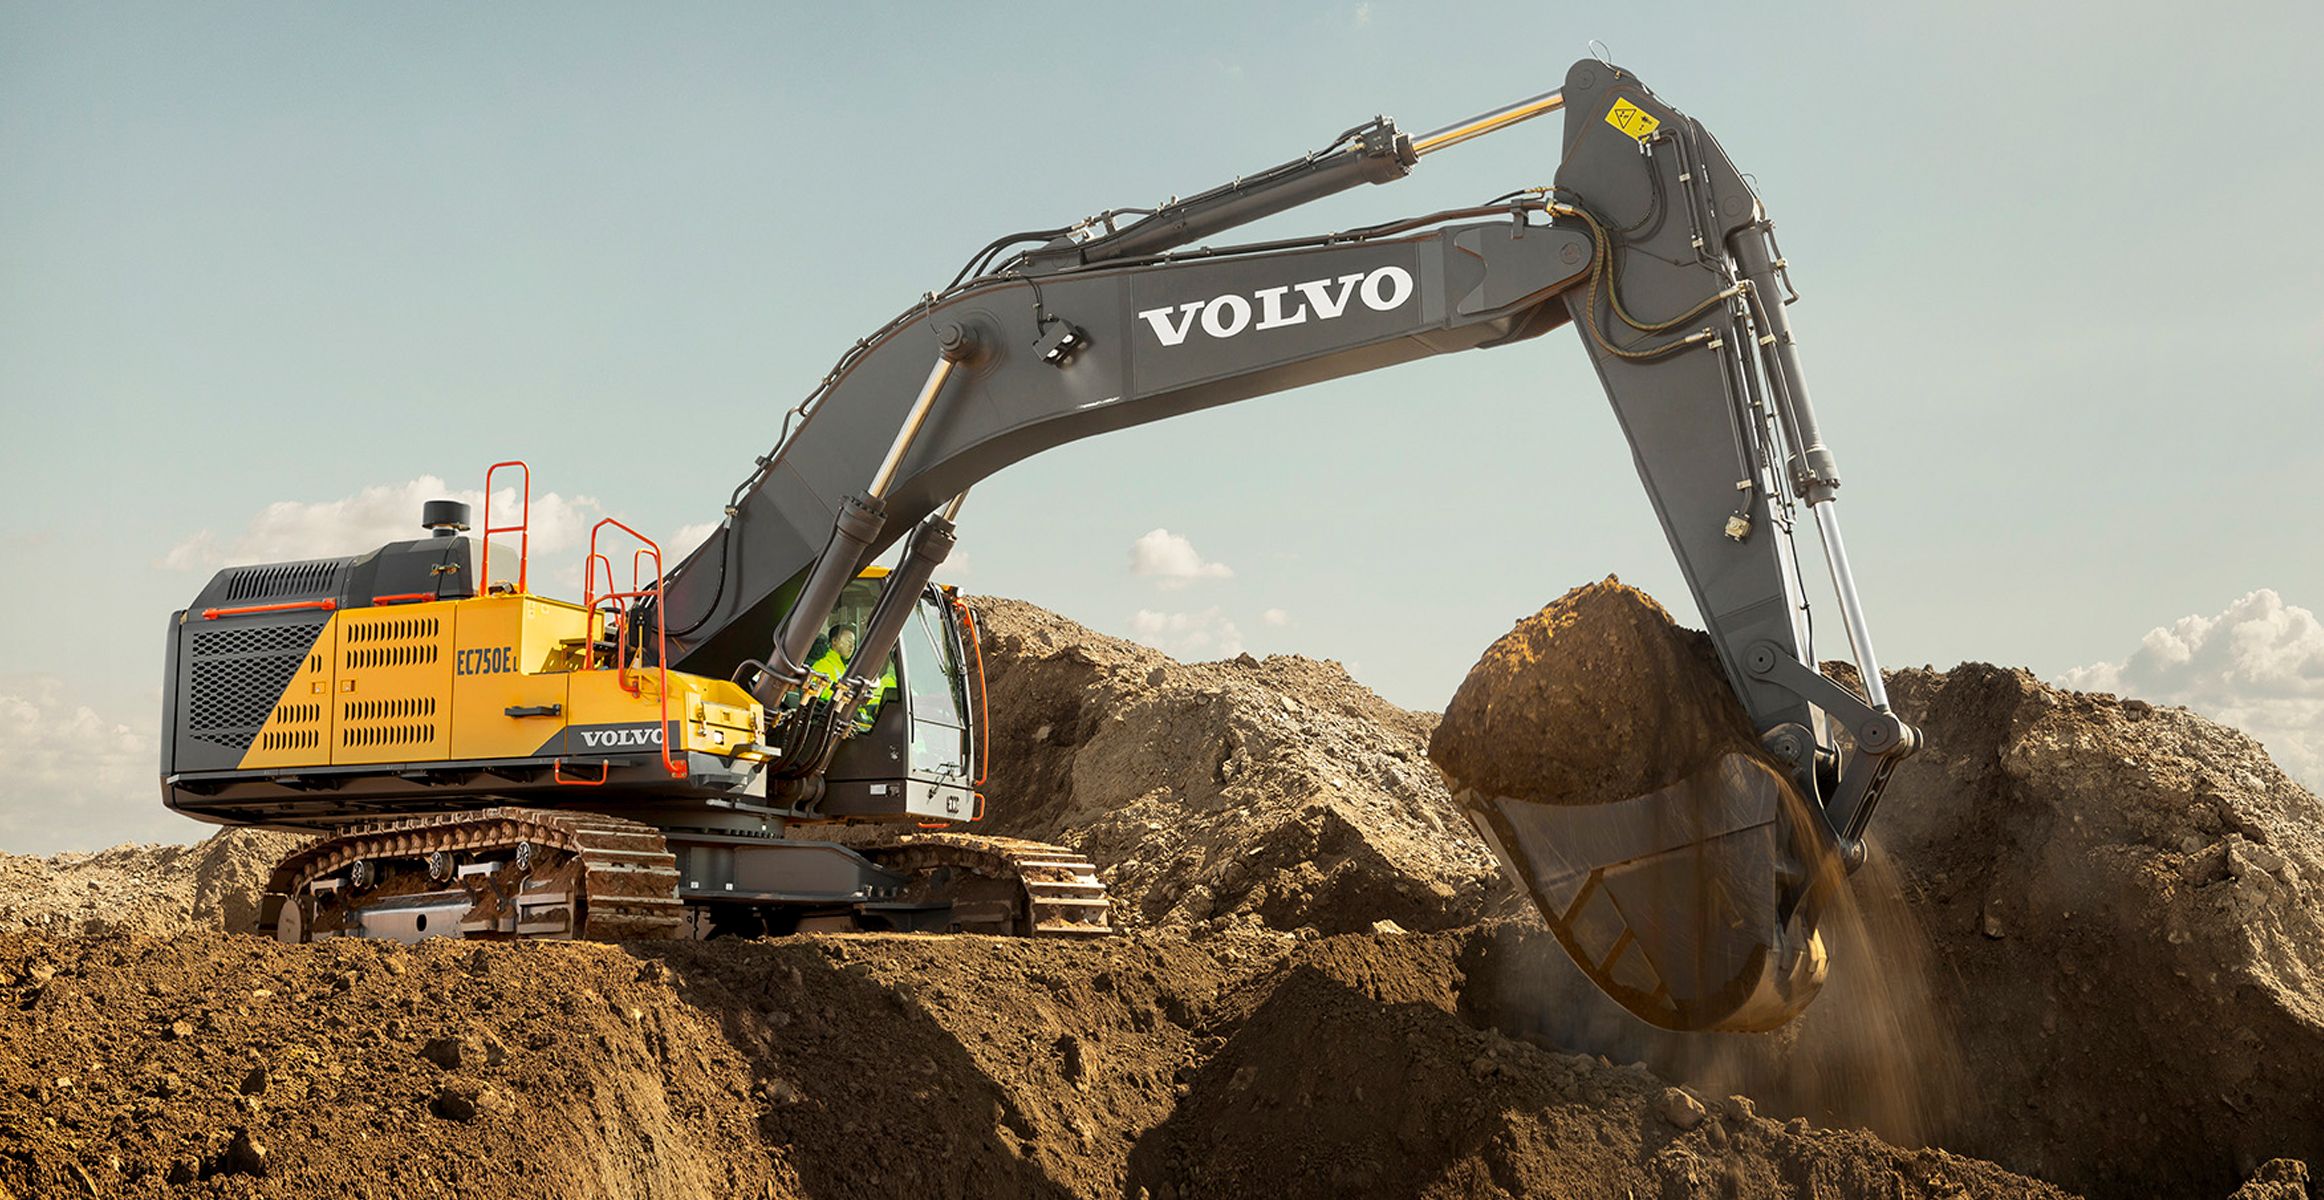 Volvo debuts its largest excavator to date — the EC750E — at MINExpo® 2016